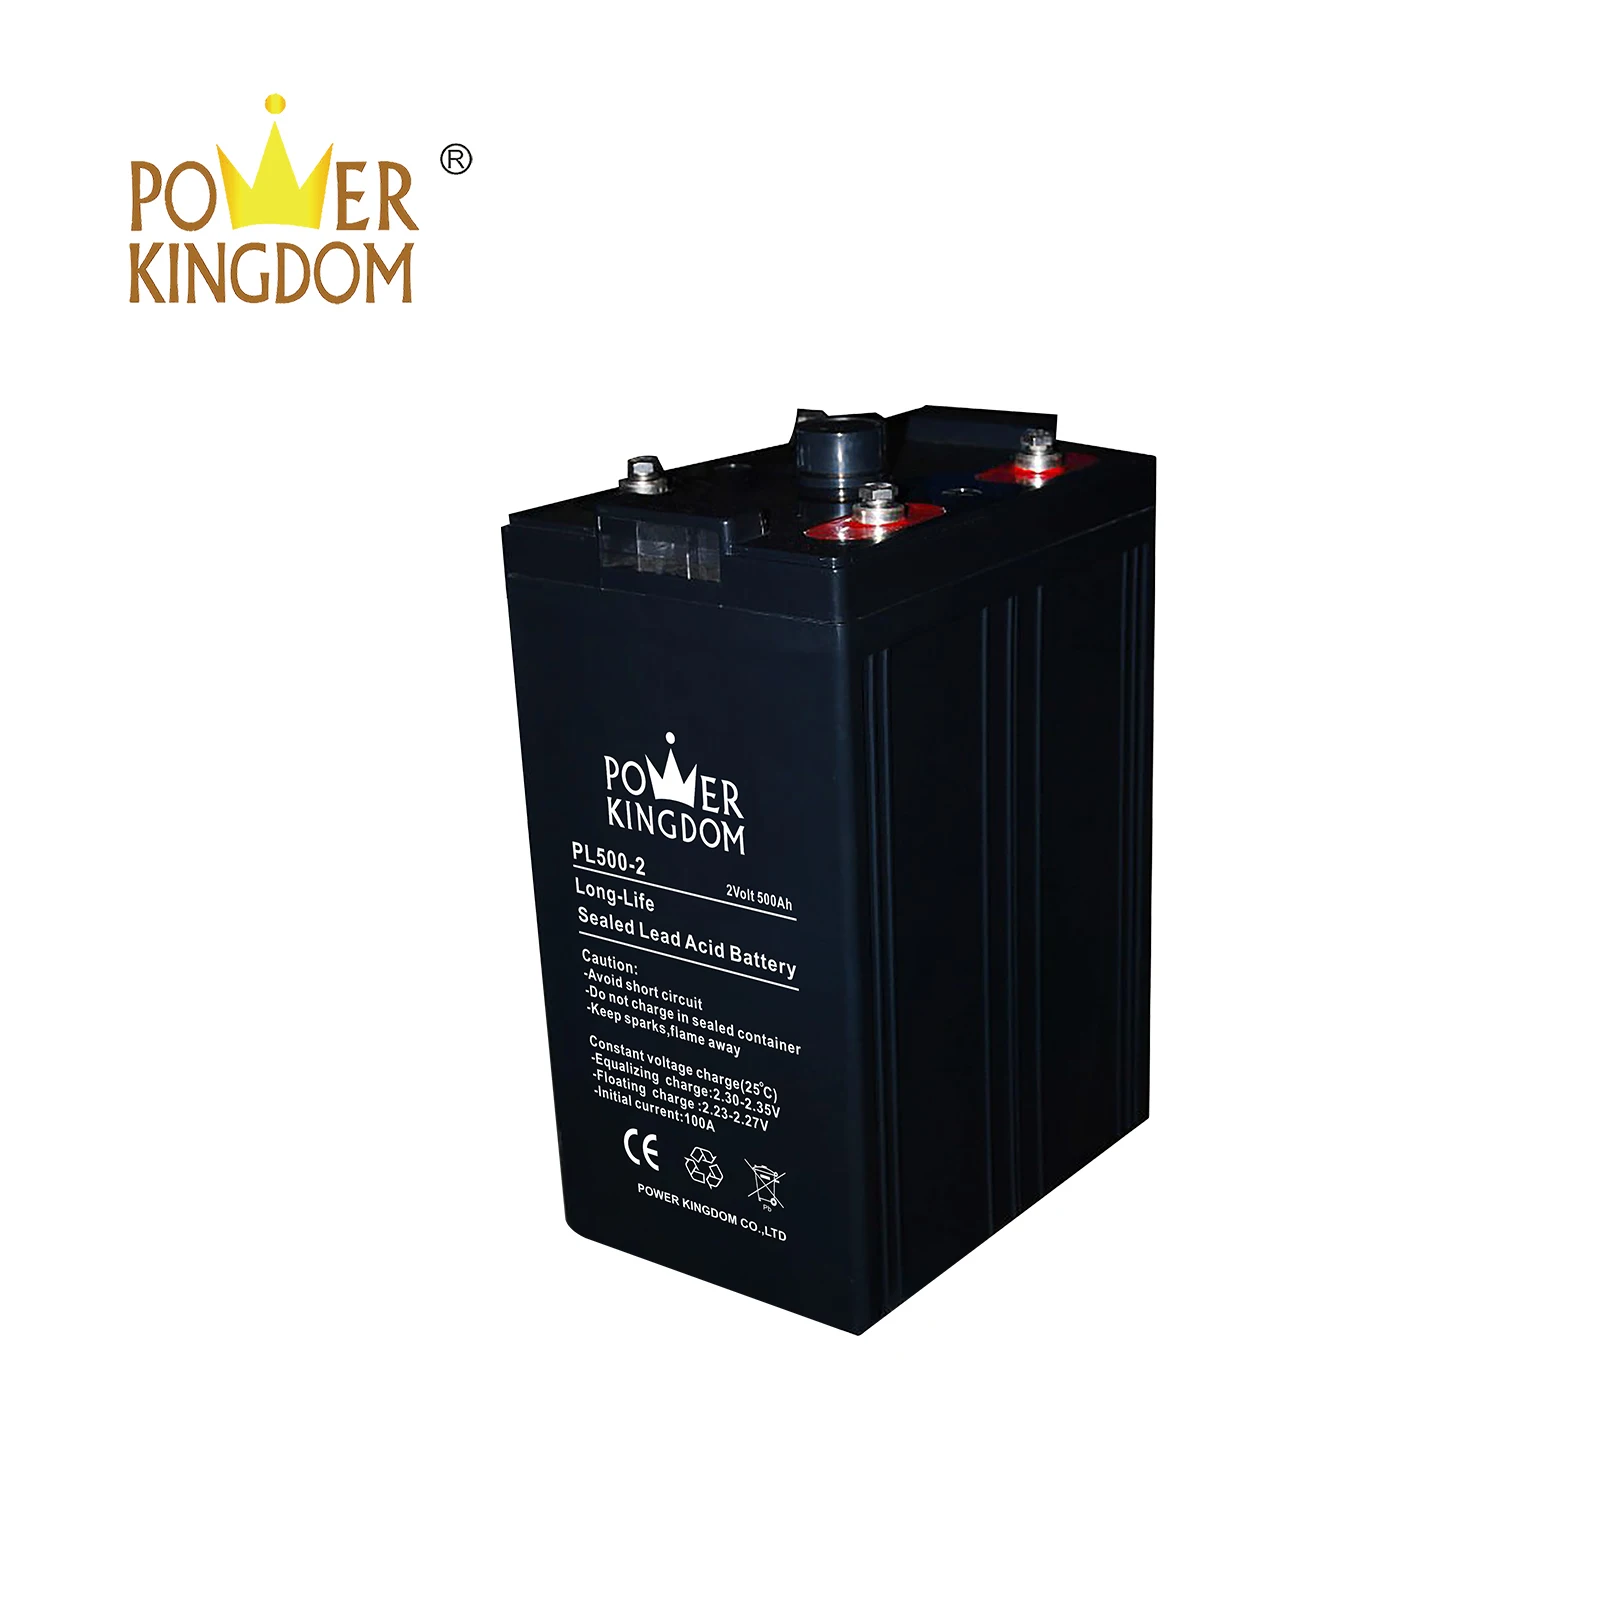 Power Kingdom 8d gel cell batteries company fire system